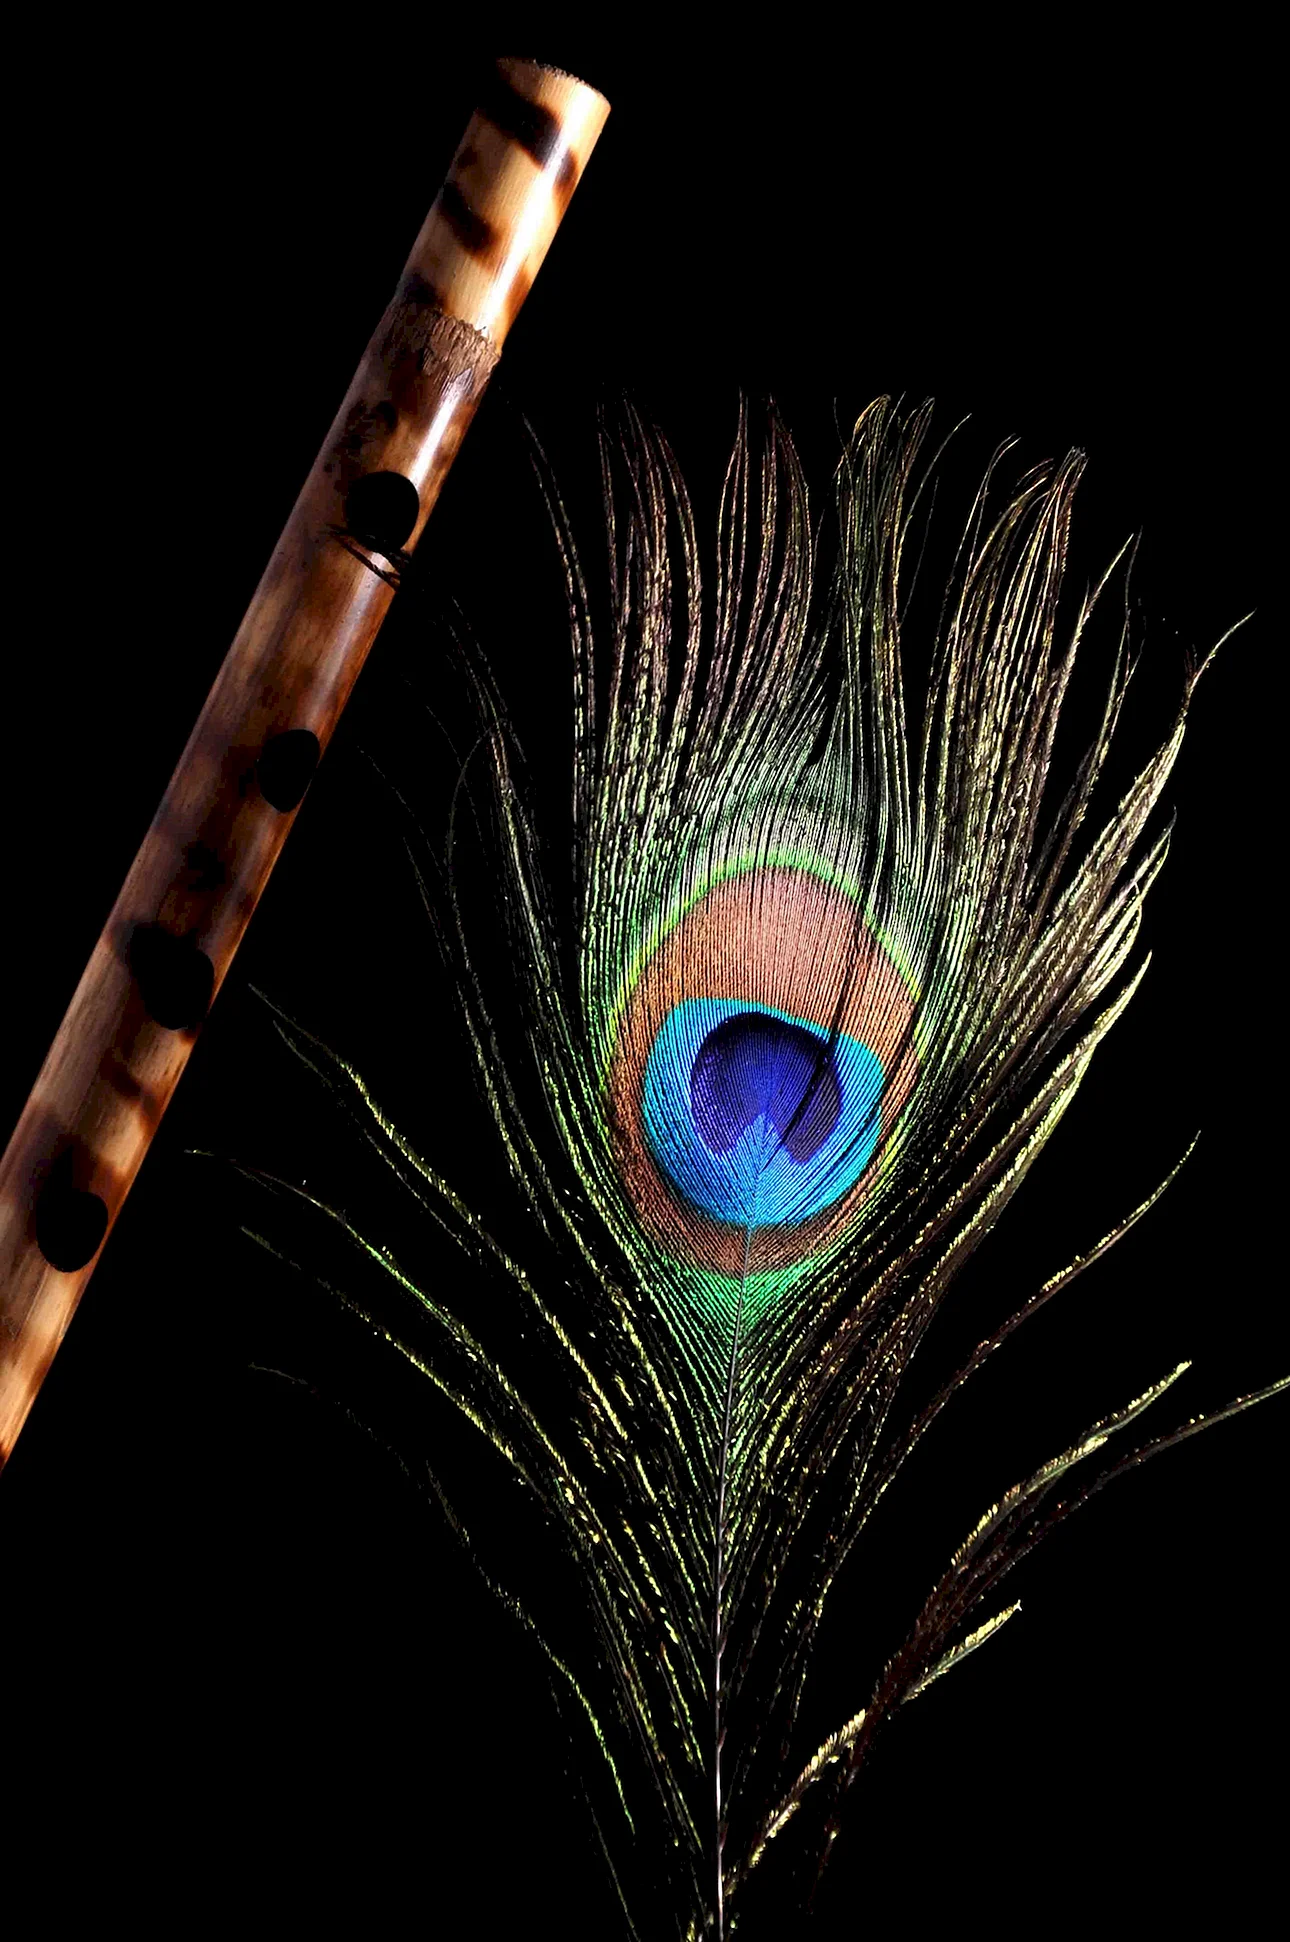 Peacock Feather Wallpaper For iPhone